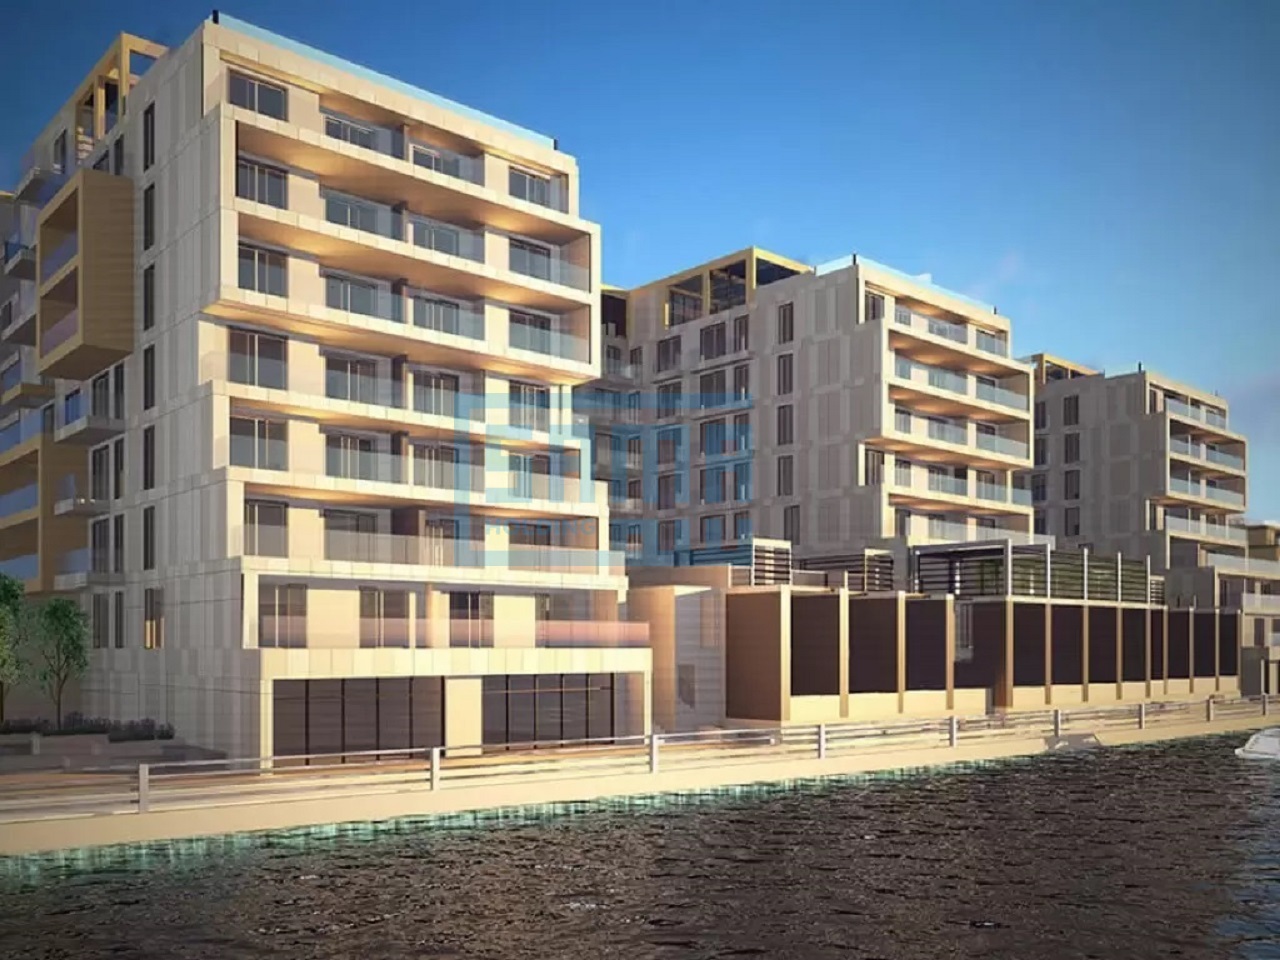 2 Bedrooms Apartment for Sale in Abu Dhabi in Al Raha Beach